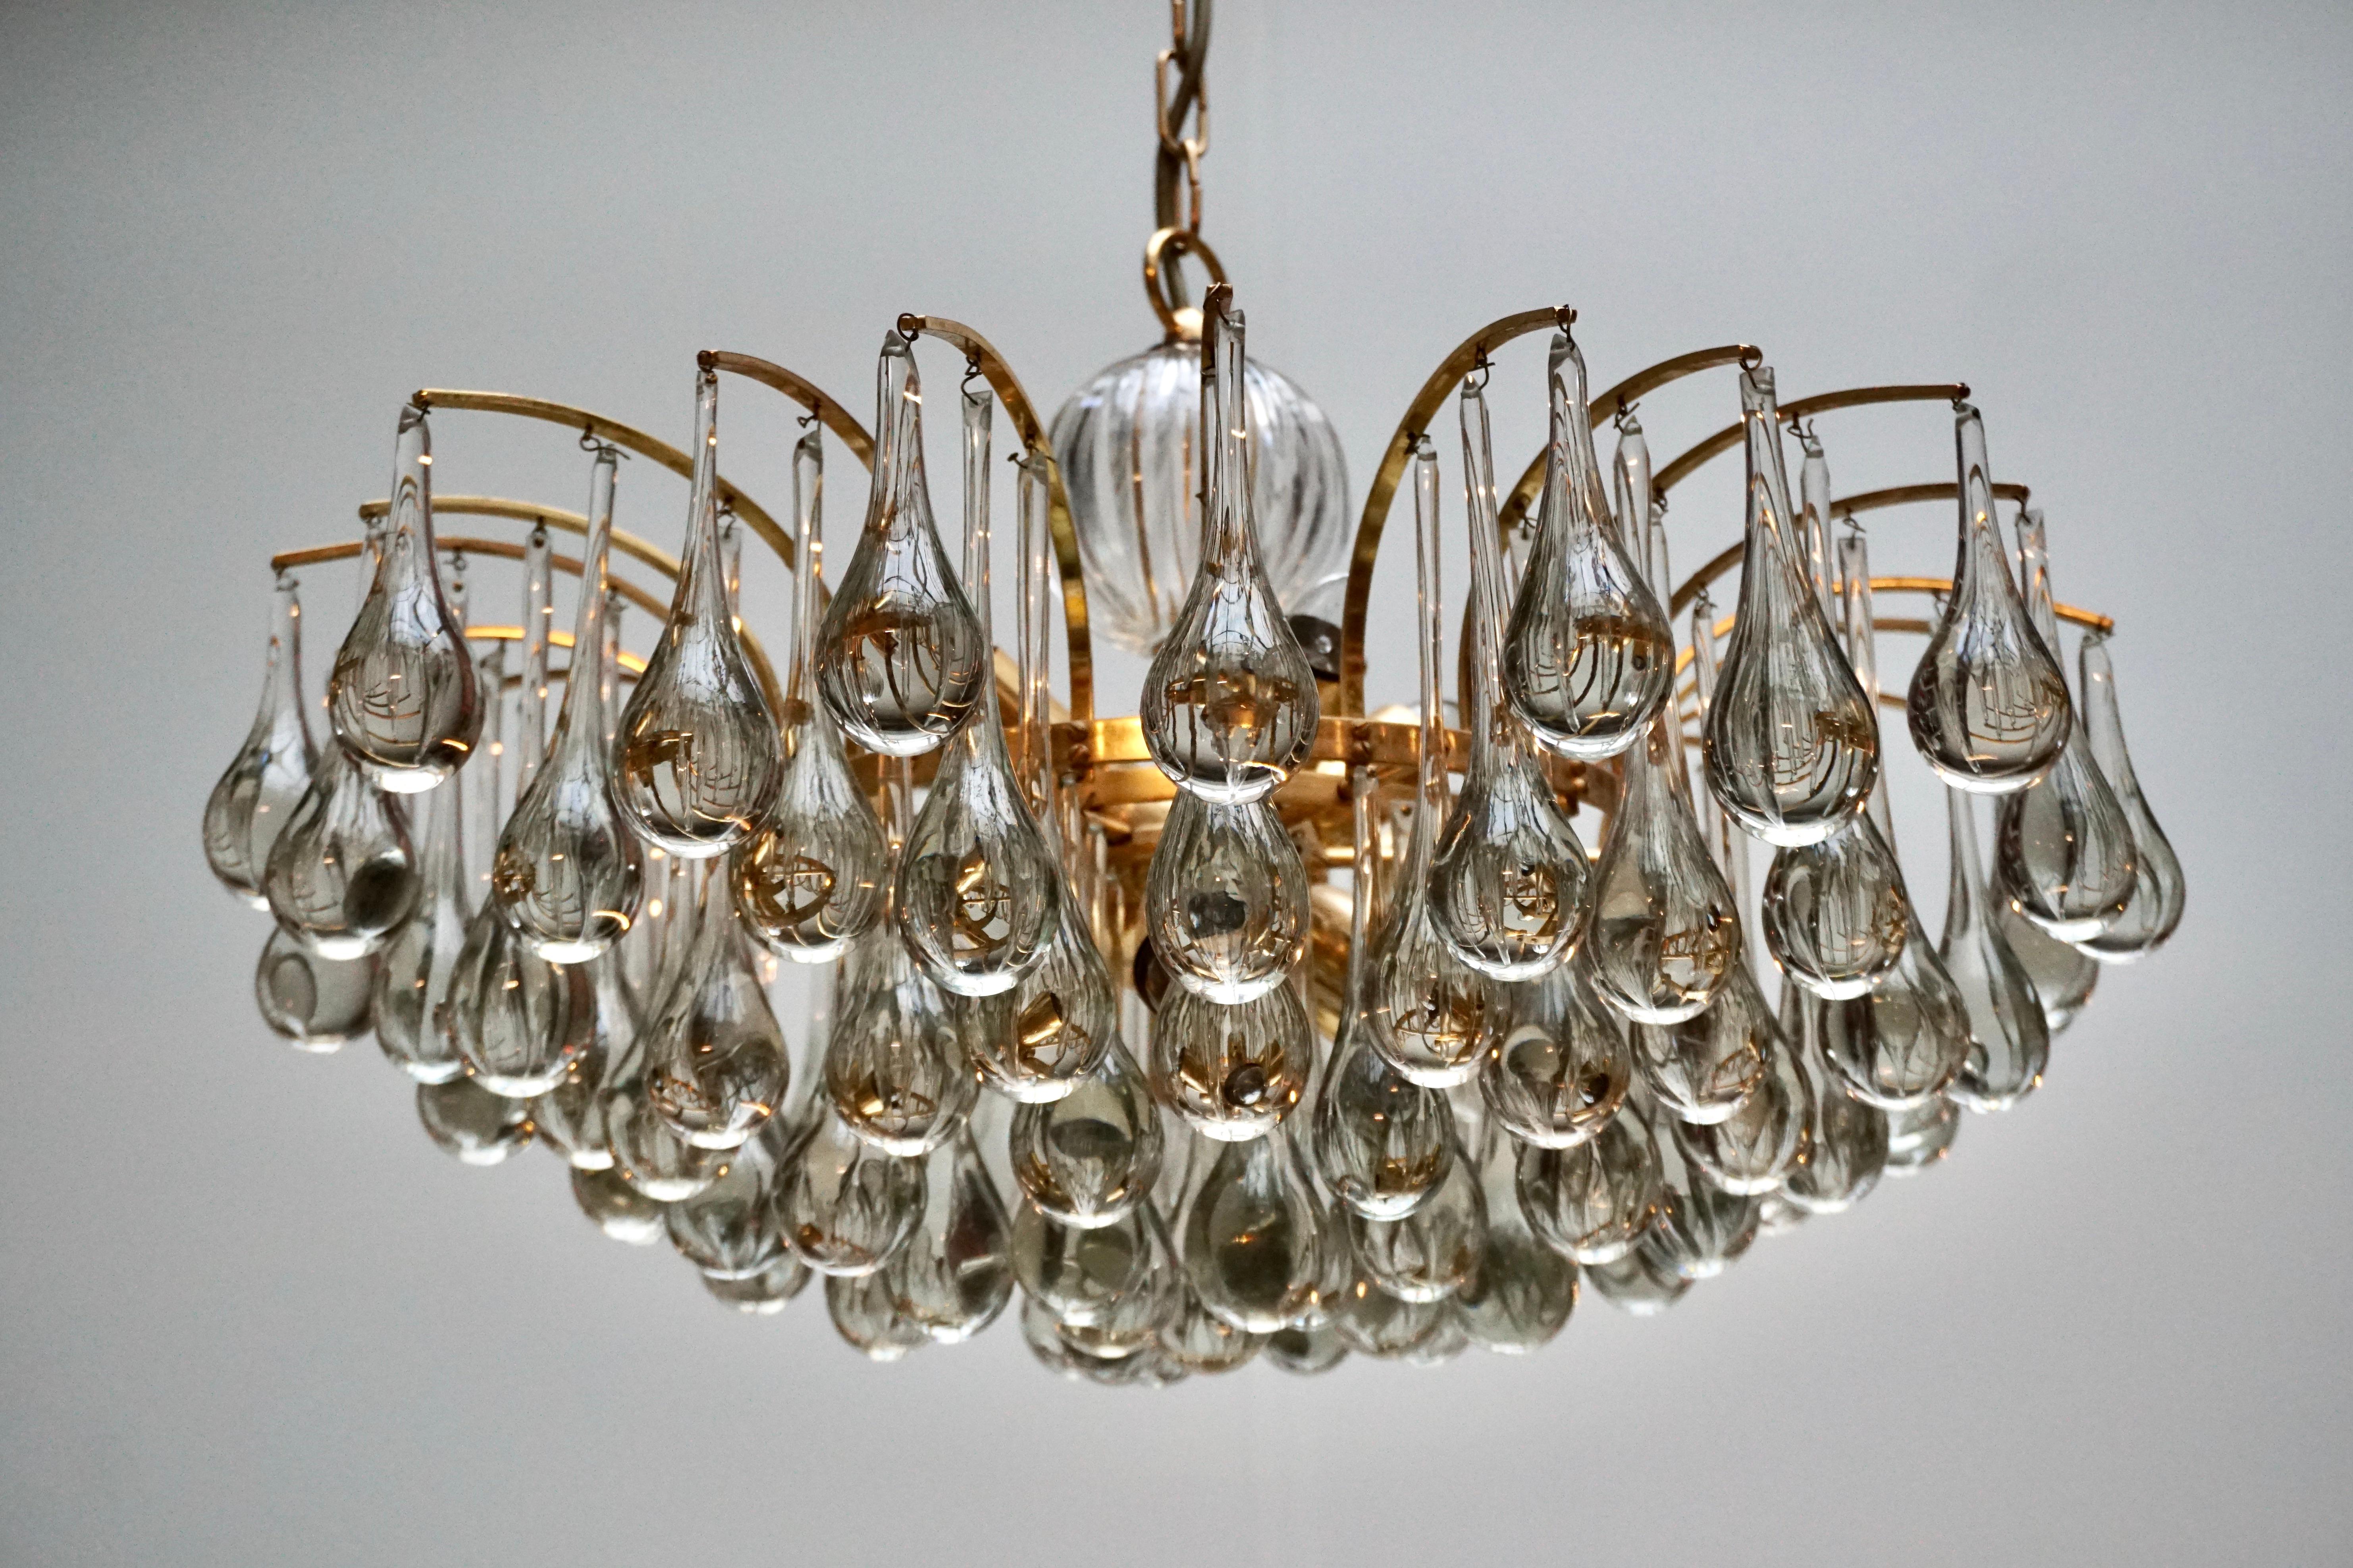 A stunning chandelier, made by Palwa, Germany, circa 1970-1979. It’s composed of Murano teardrop Crystal glass pieces on a gilded brass frame. Best of the 1970s from Germany. 

The light requires ten single E27 screw fit lightbulbs (40Watt max.)